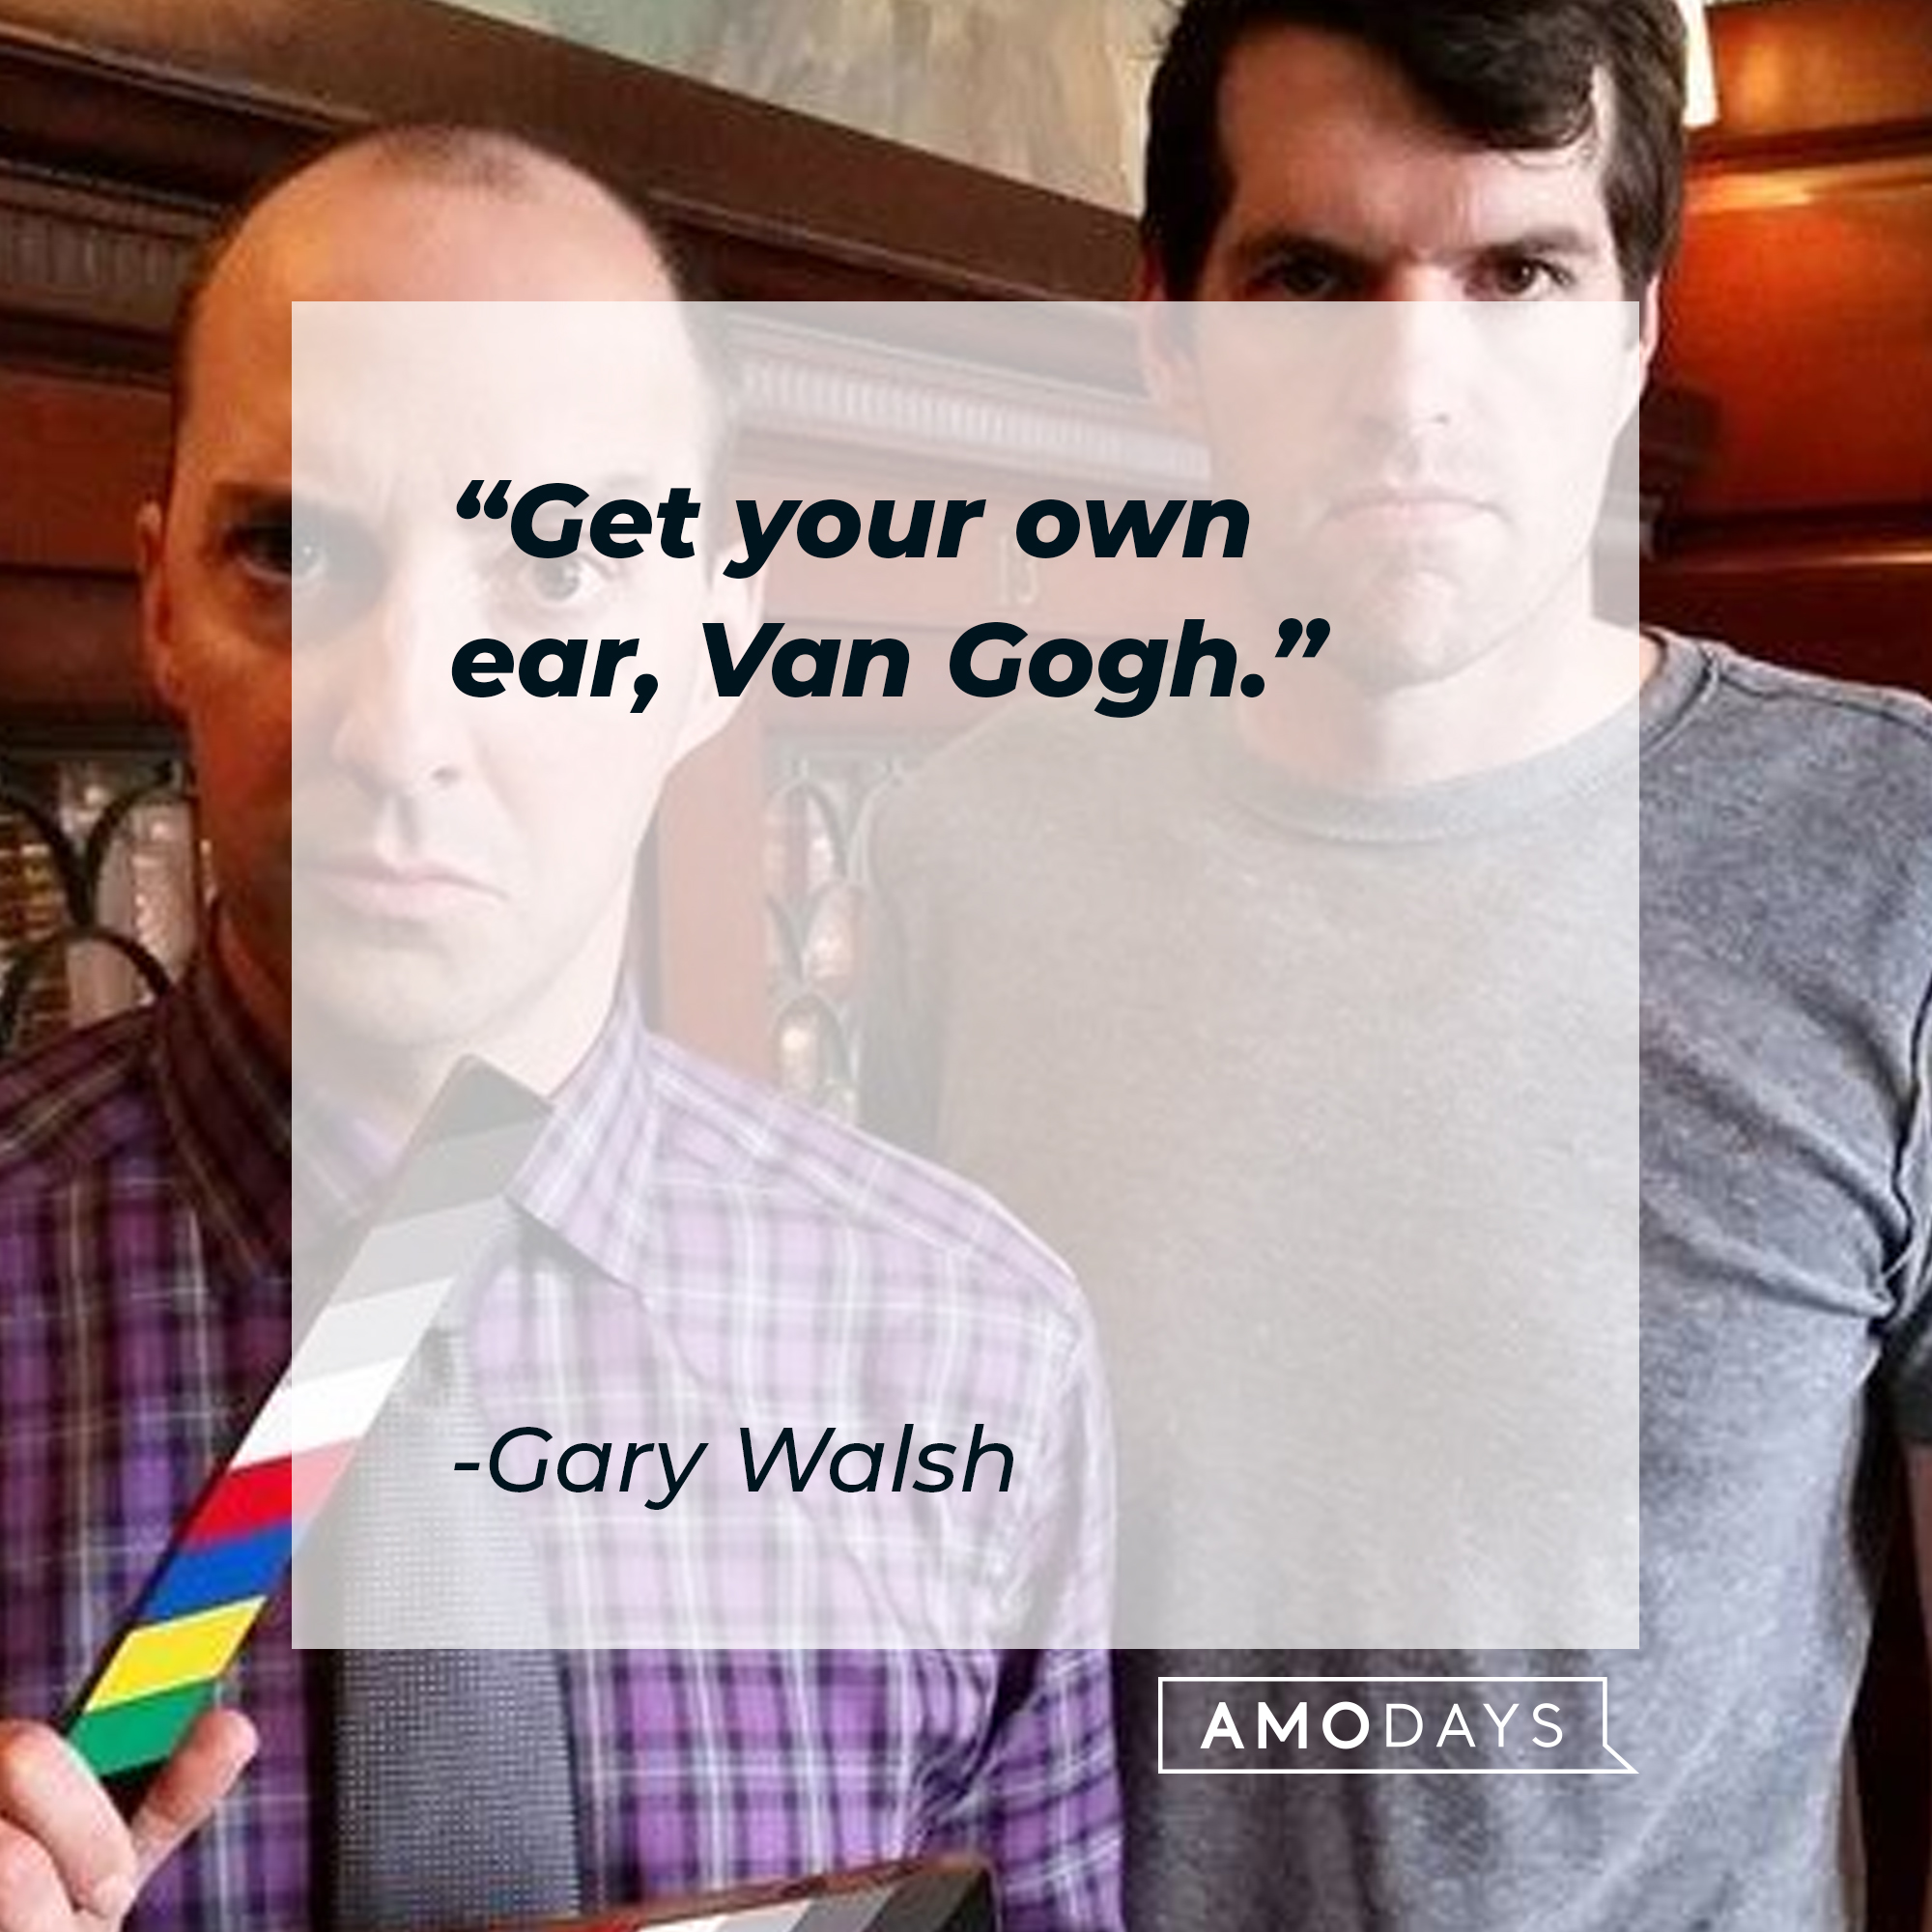 Two character’s from “Veep” with Gary Walsh’s quote: “Get your own ear, Van Gogh.” | Source: Facebook.com/veep